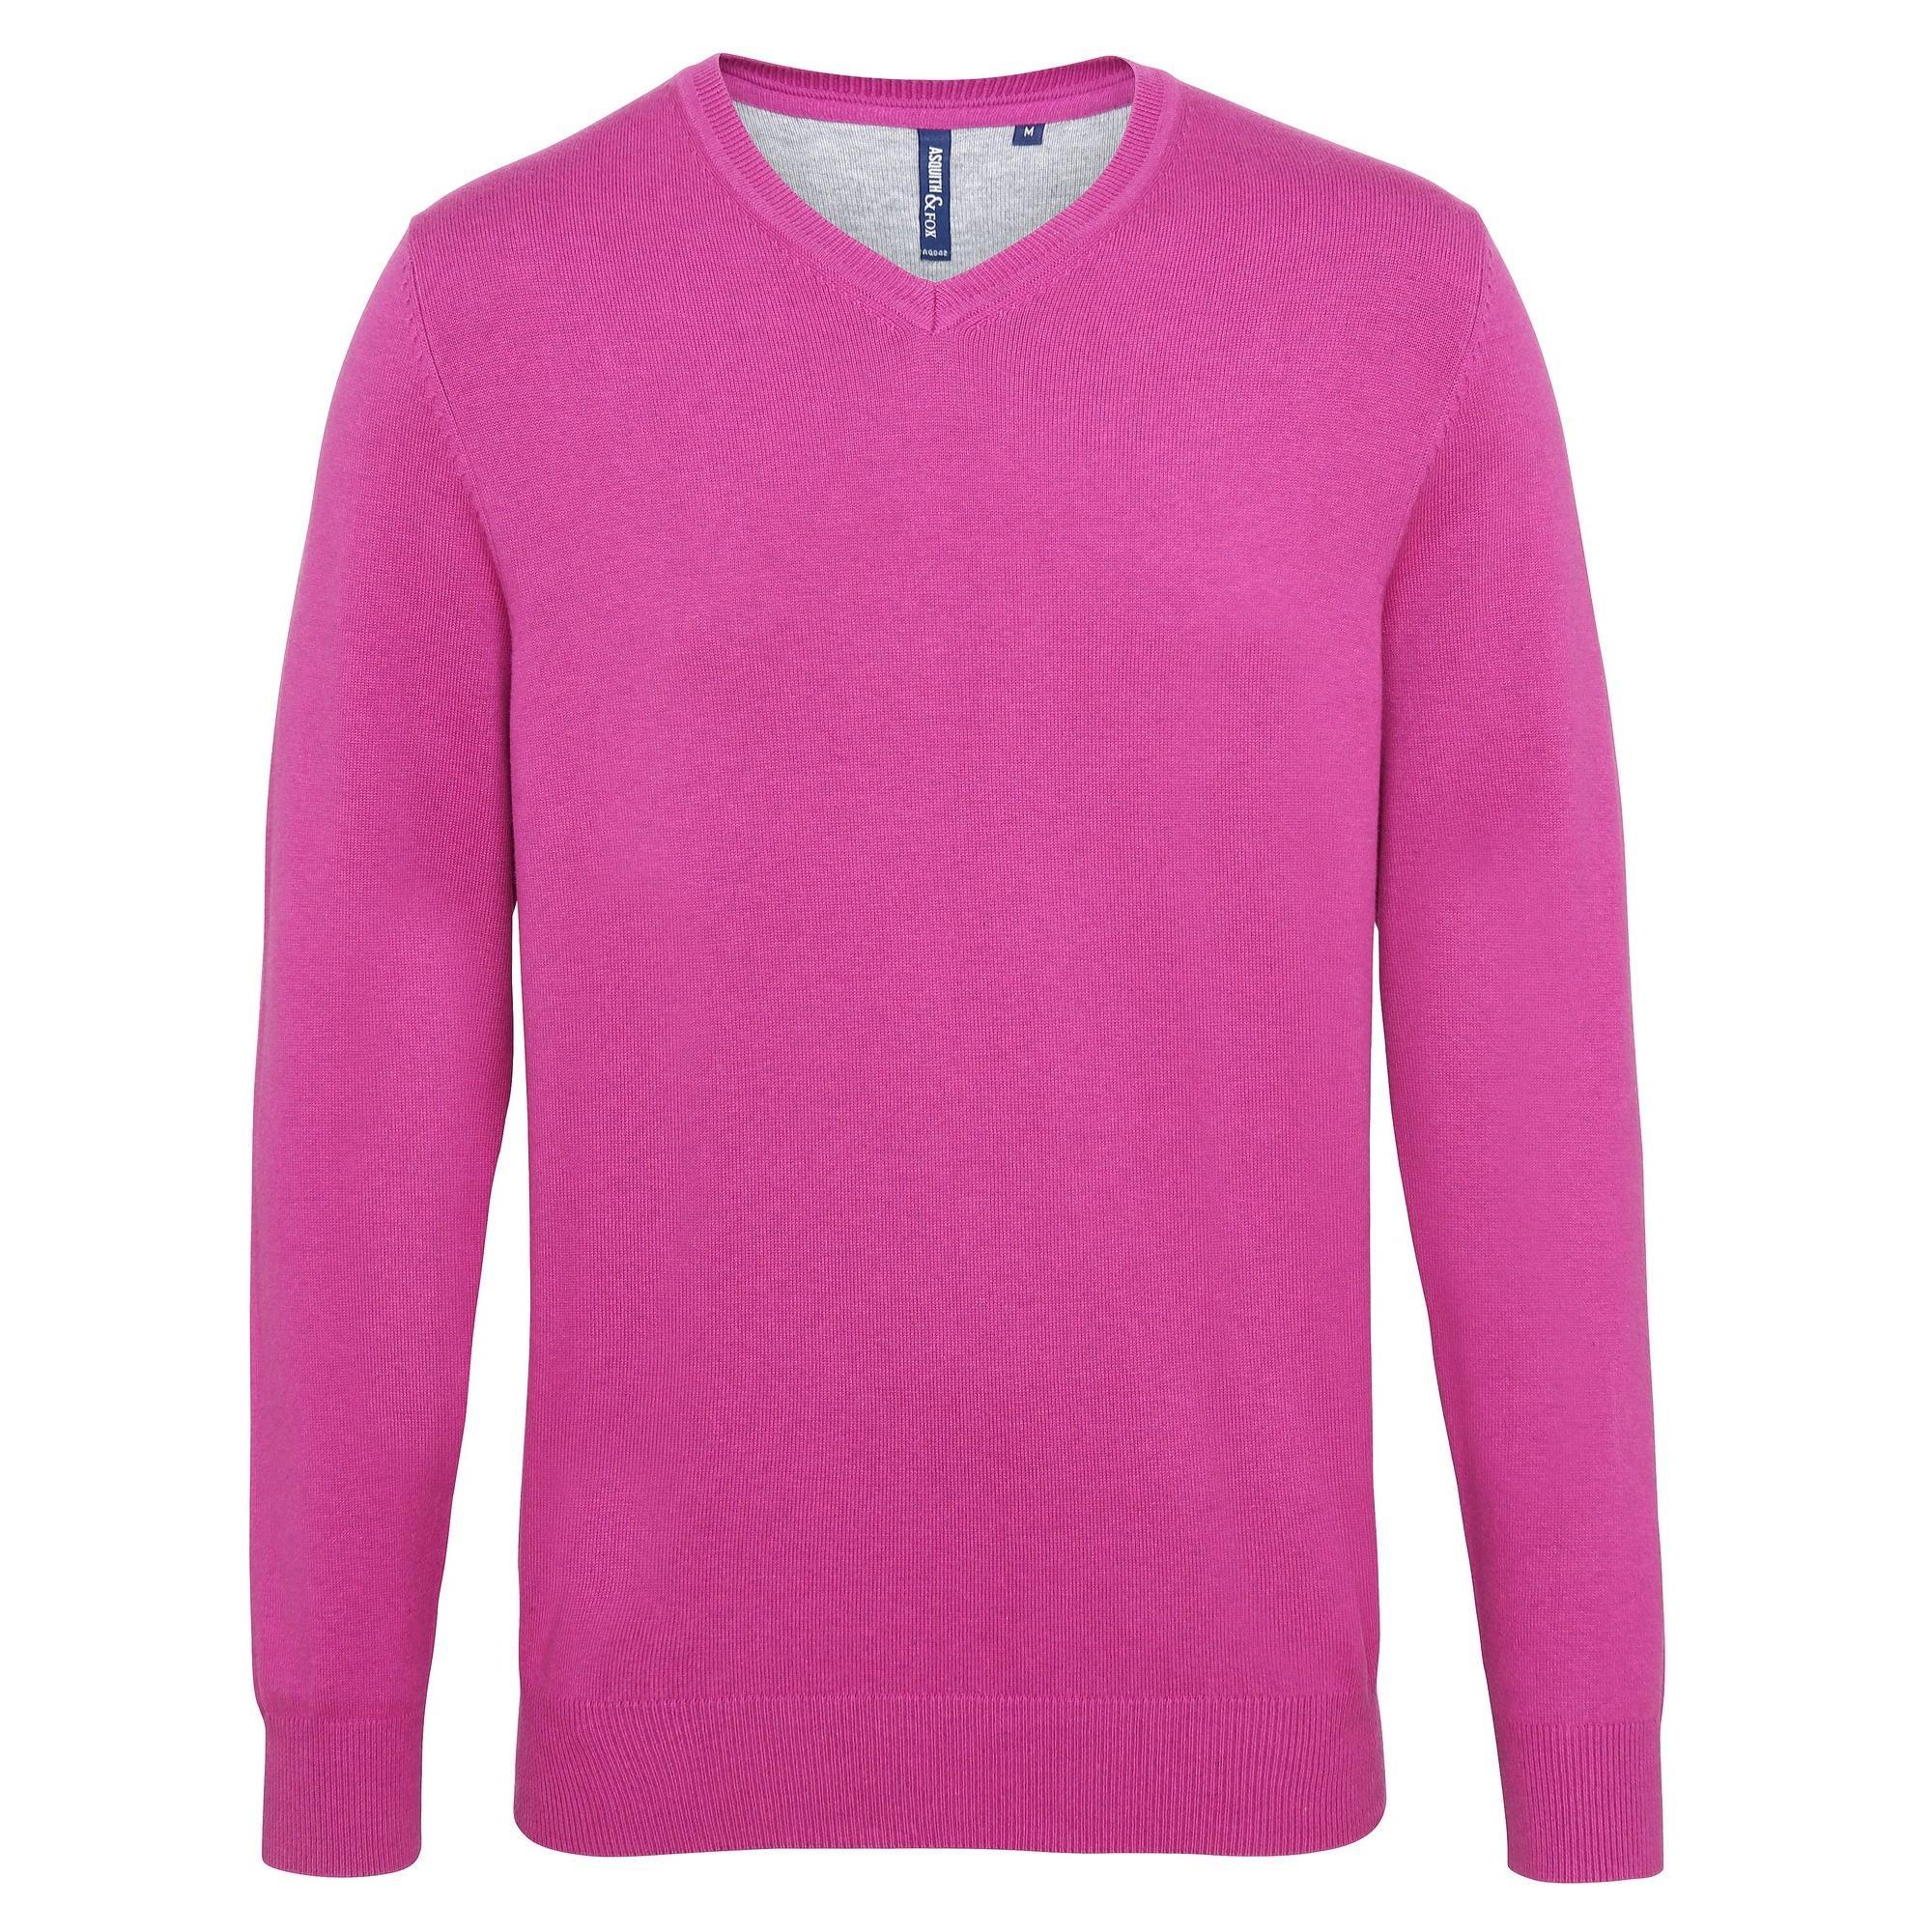 Asquith & Fox Mens Cotton Rich V-Neck Sweater (Orchid Heather) (2XL)